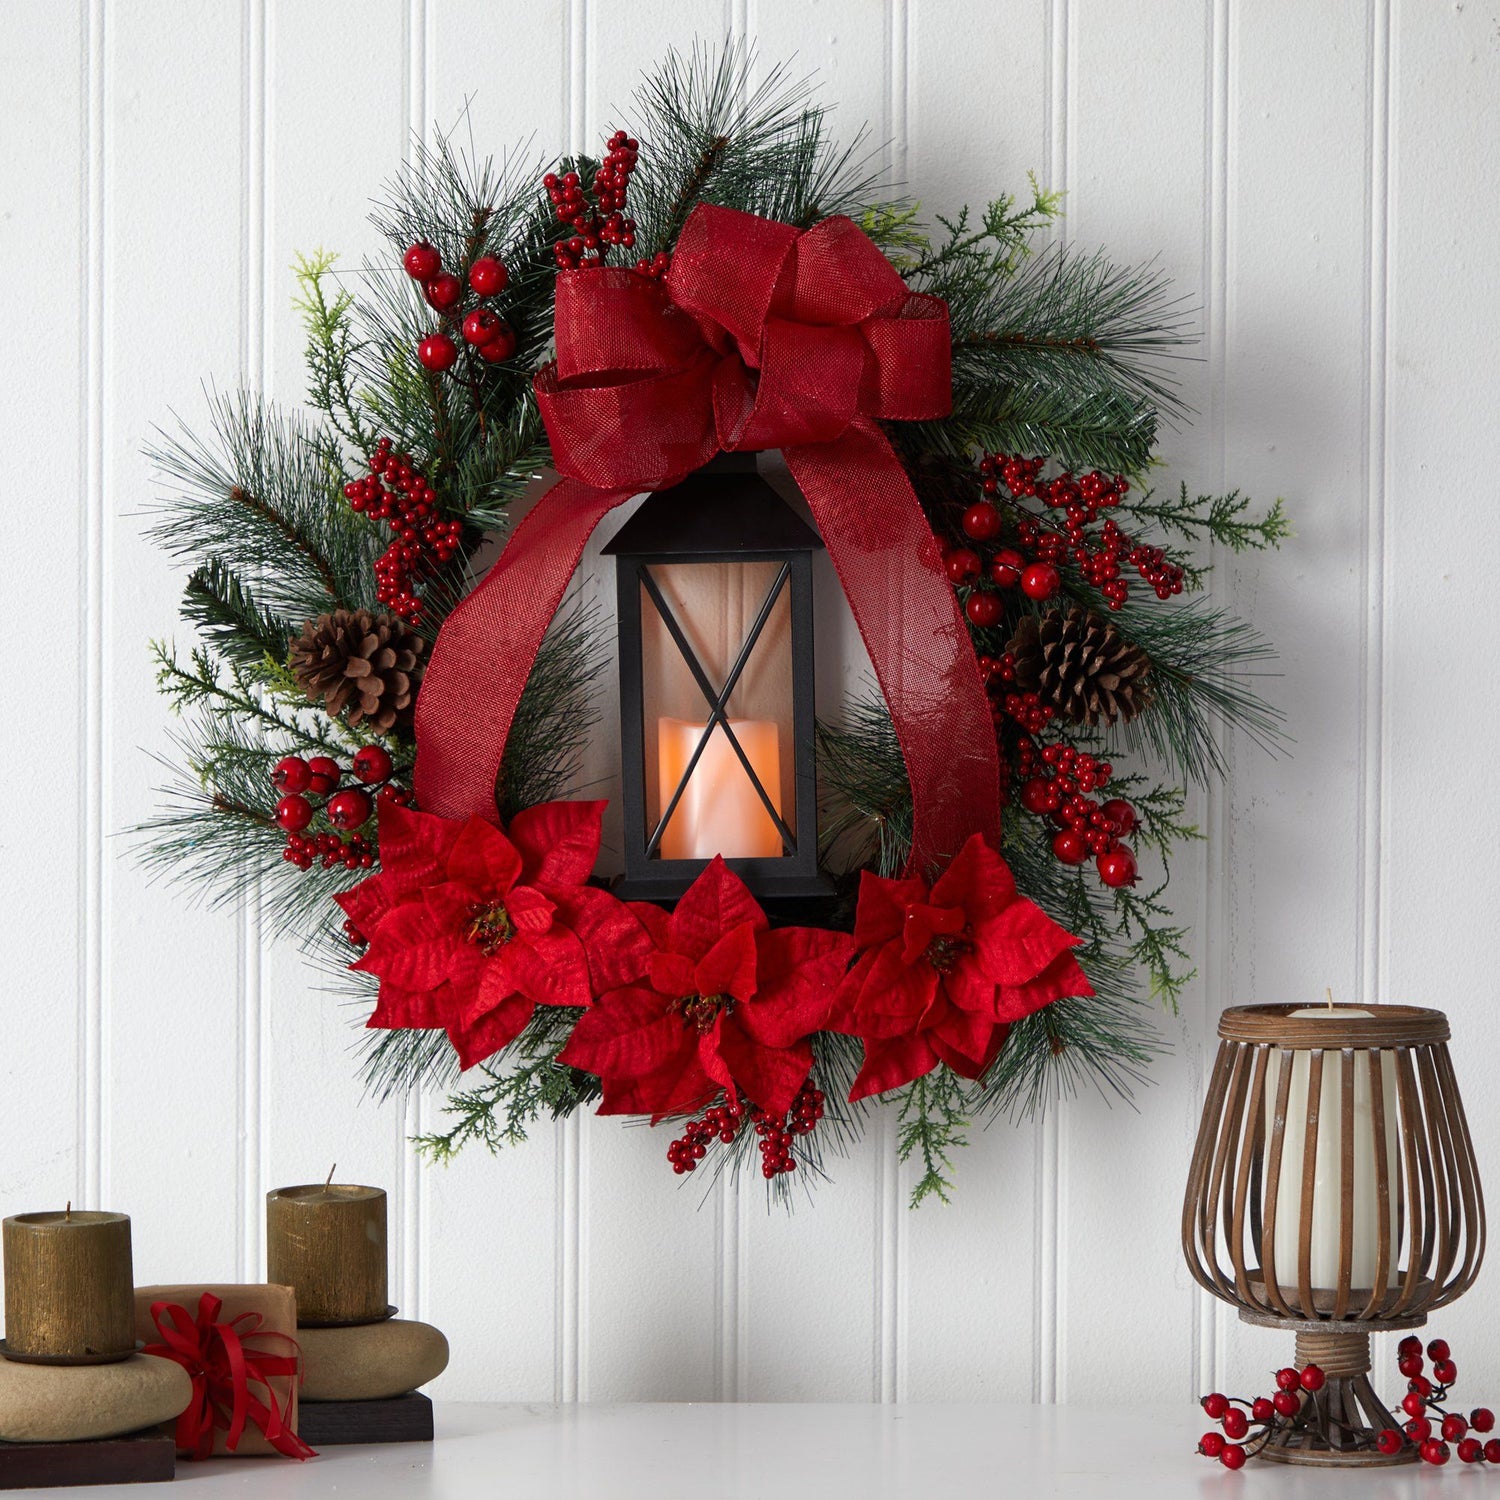 28” Poinsettia and Berry Holiday Lantern Christmas Wreath with LED Candle